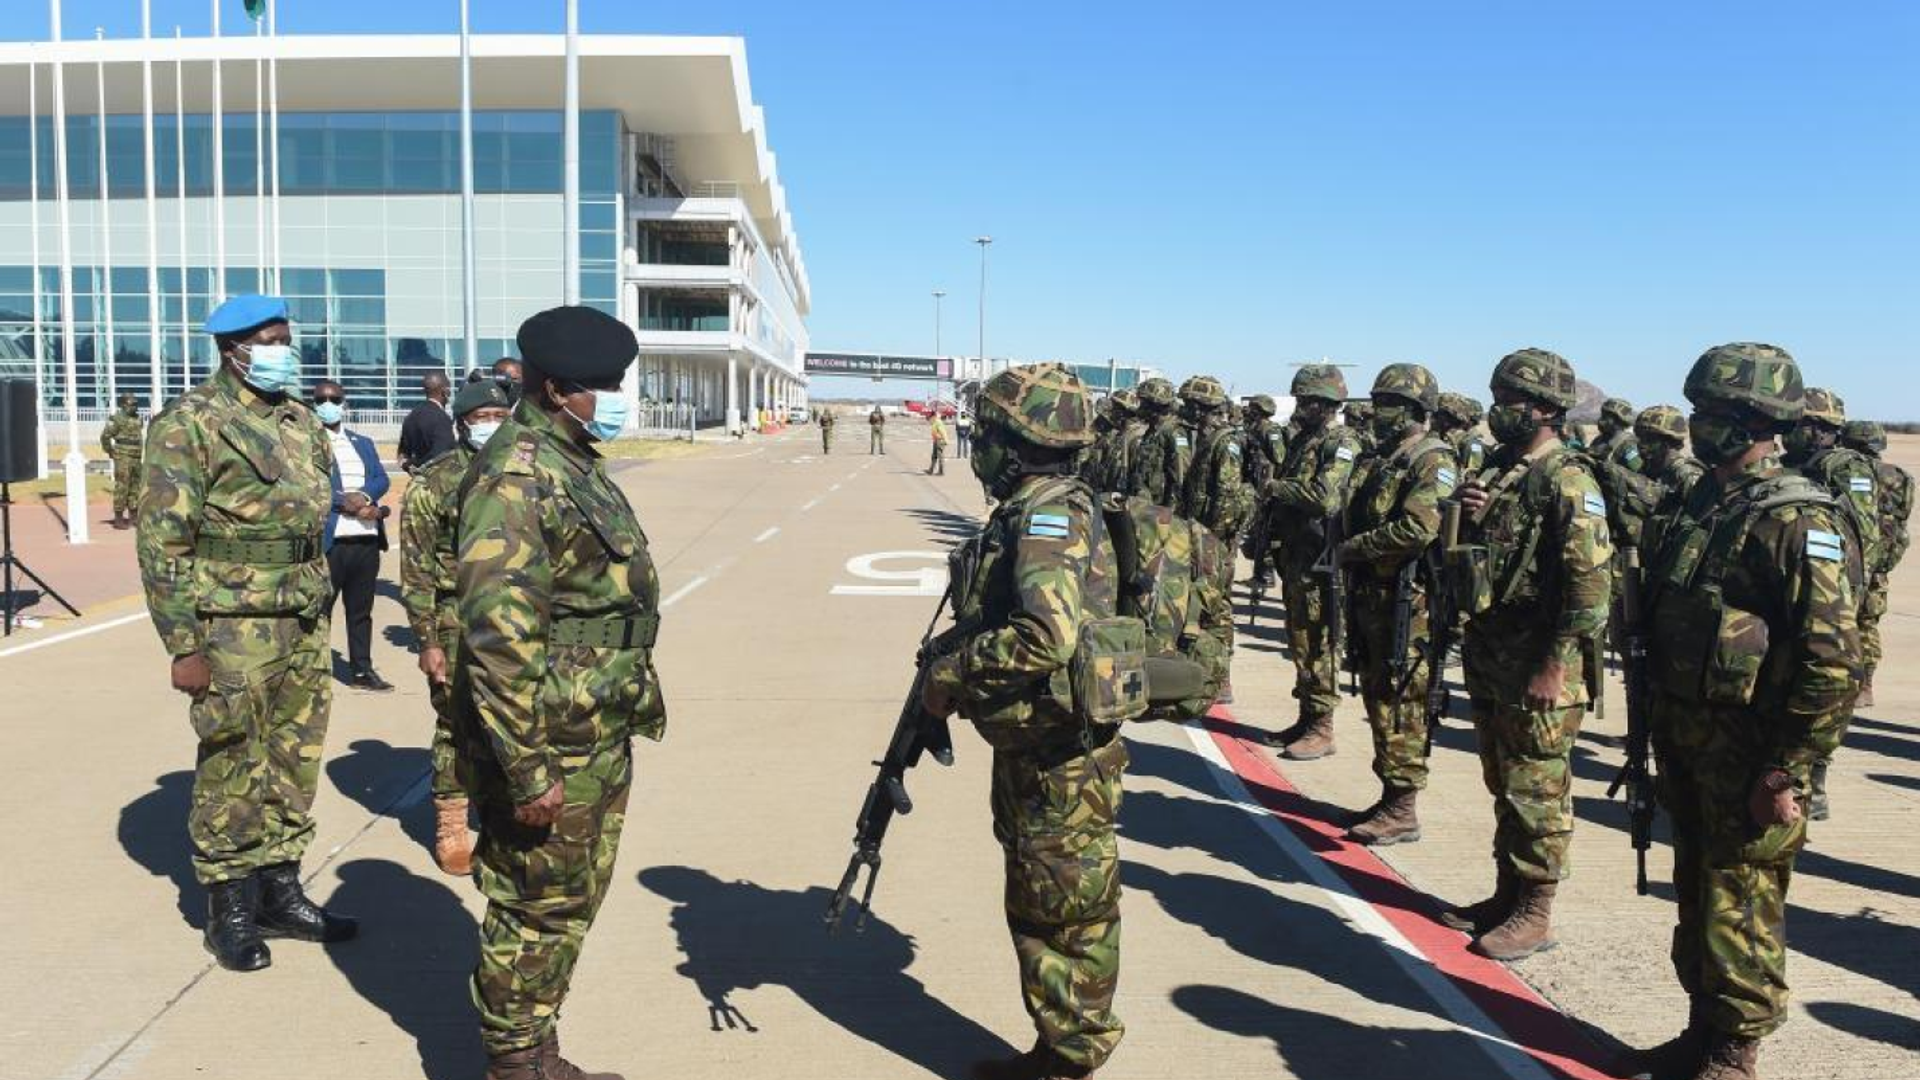 Botswana's President Mokgweetsi Masisi sends off troops to Mozambique as part of the Southern Africa Development Community (SADC) Standby Force at Sir Seretse Khama International Airport in Gaborone, Botswana, July 26, 2021. The Botswana Defence Force (BDF) will provide regional support to the Republic of Mozambique to combat the looming threat of terrorism and acts of violent extremism in the Cabo Delgado region, as an element of the SADC Mission in Mozambique. A total of 296 BDF soldiers will be deployed in Mozambique, and 70 of them departed on Monday. - Sputnik International, 1920, 07.10.2021